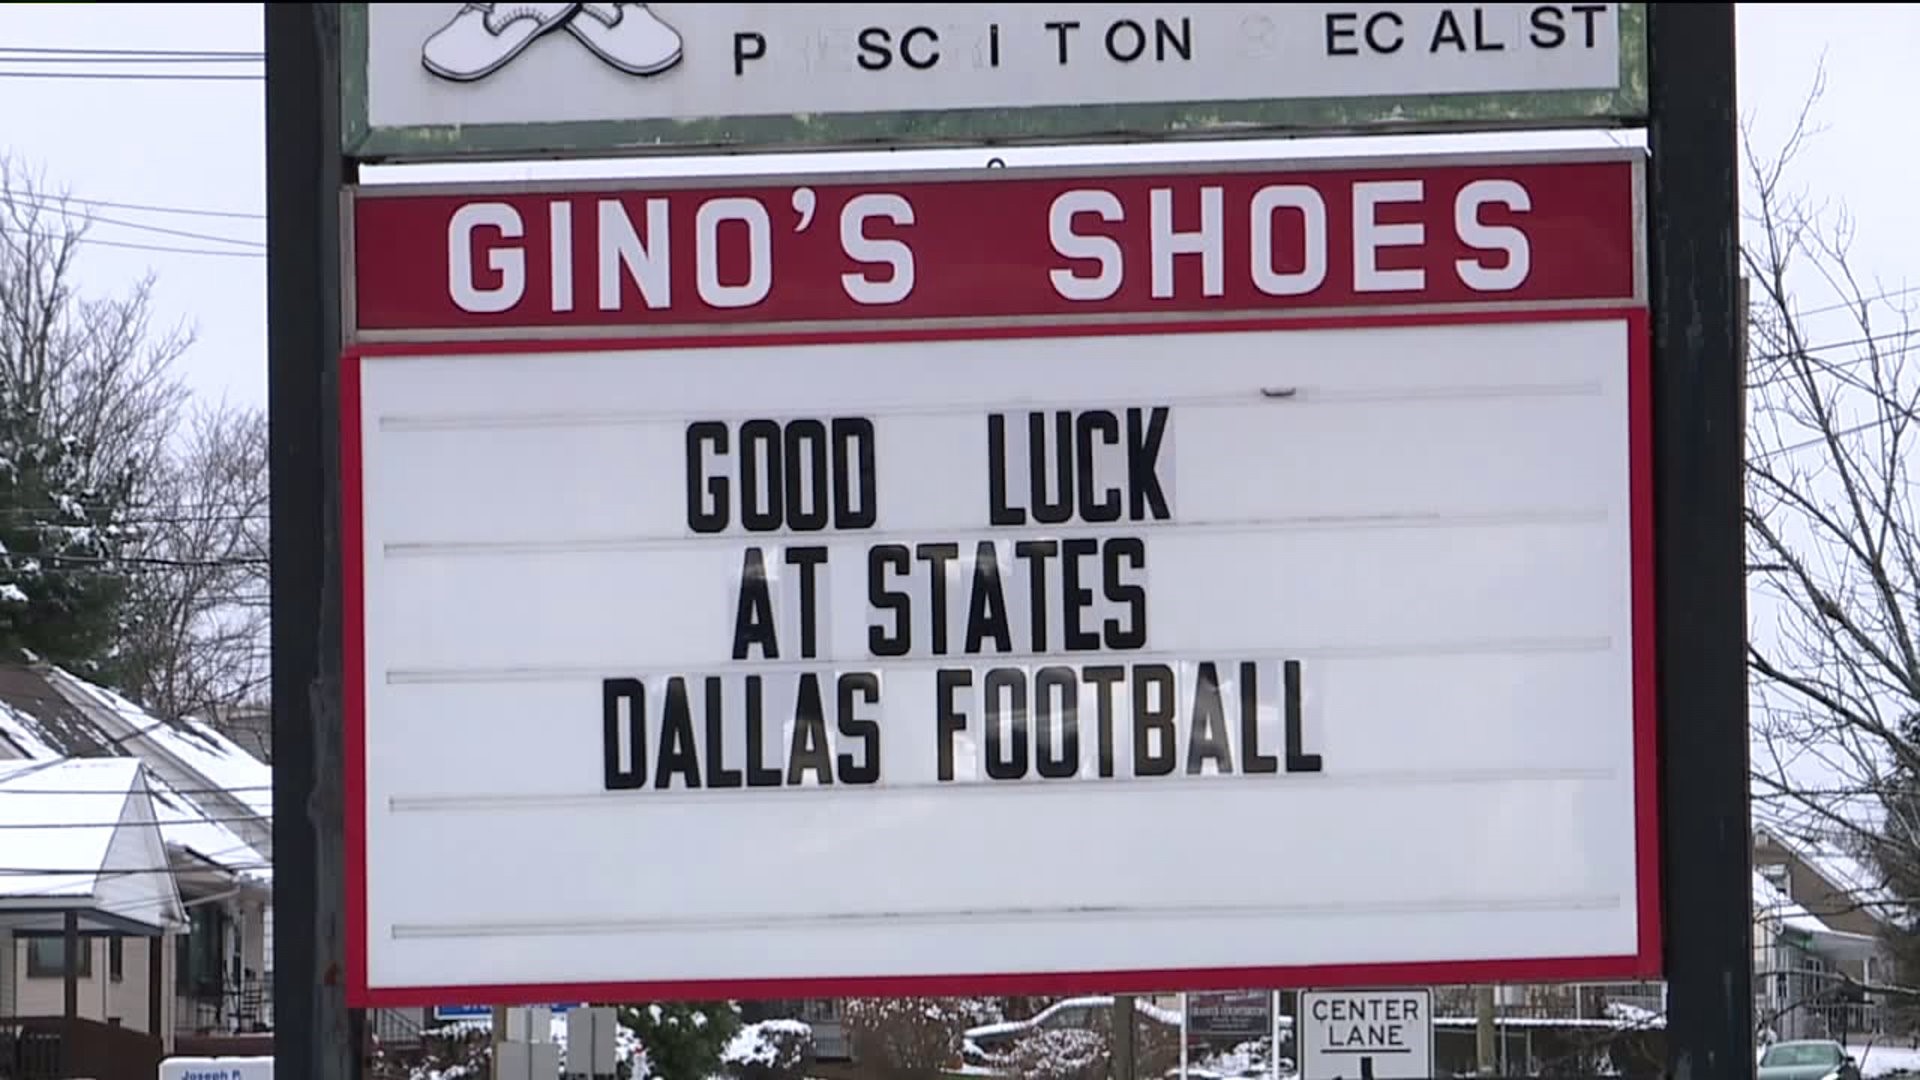 Students, Community Supporting Dallas Football in State Championship Bid